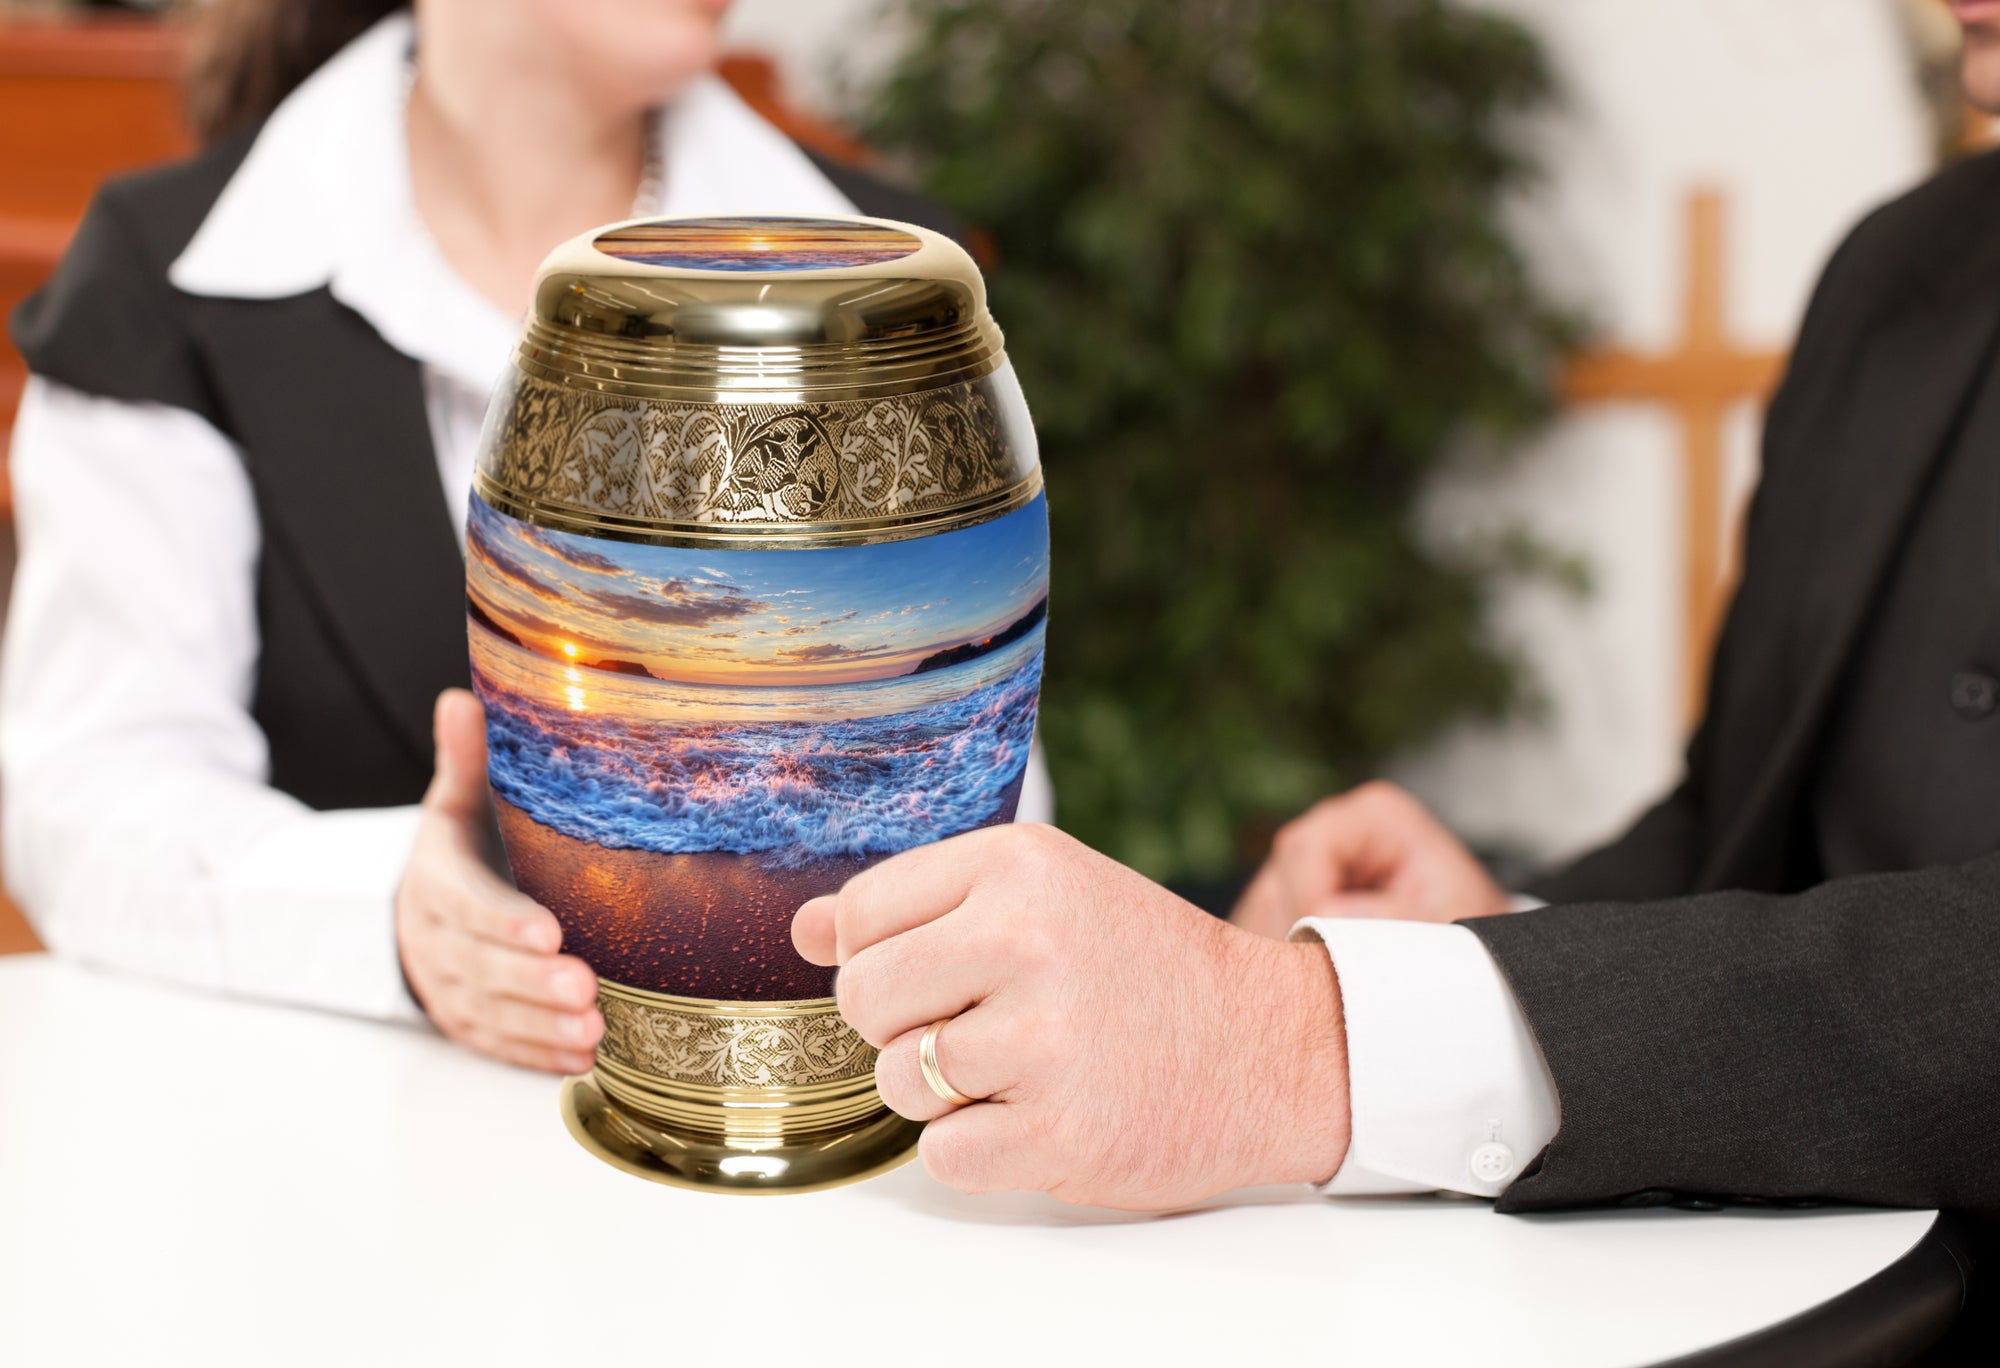 Do I Need To Buy An Urn From The Funeral Home?